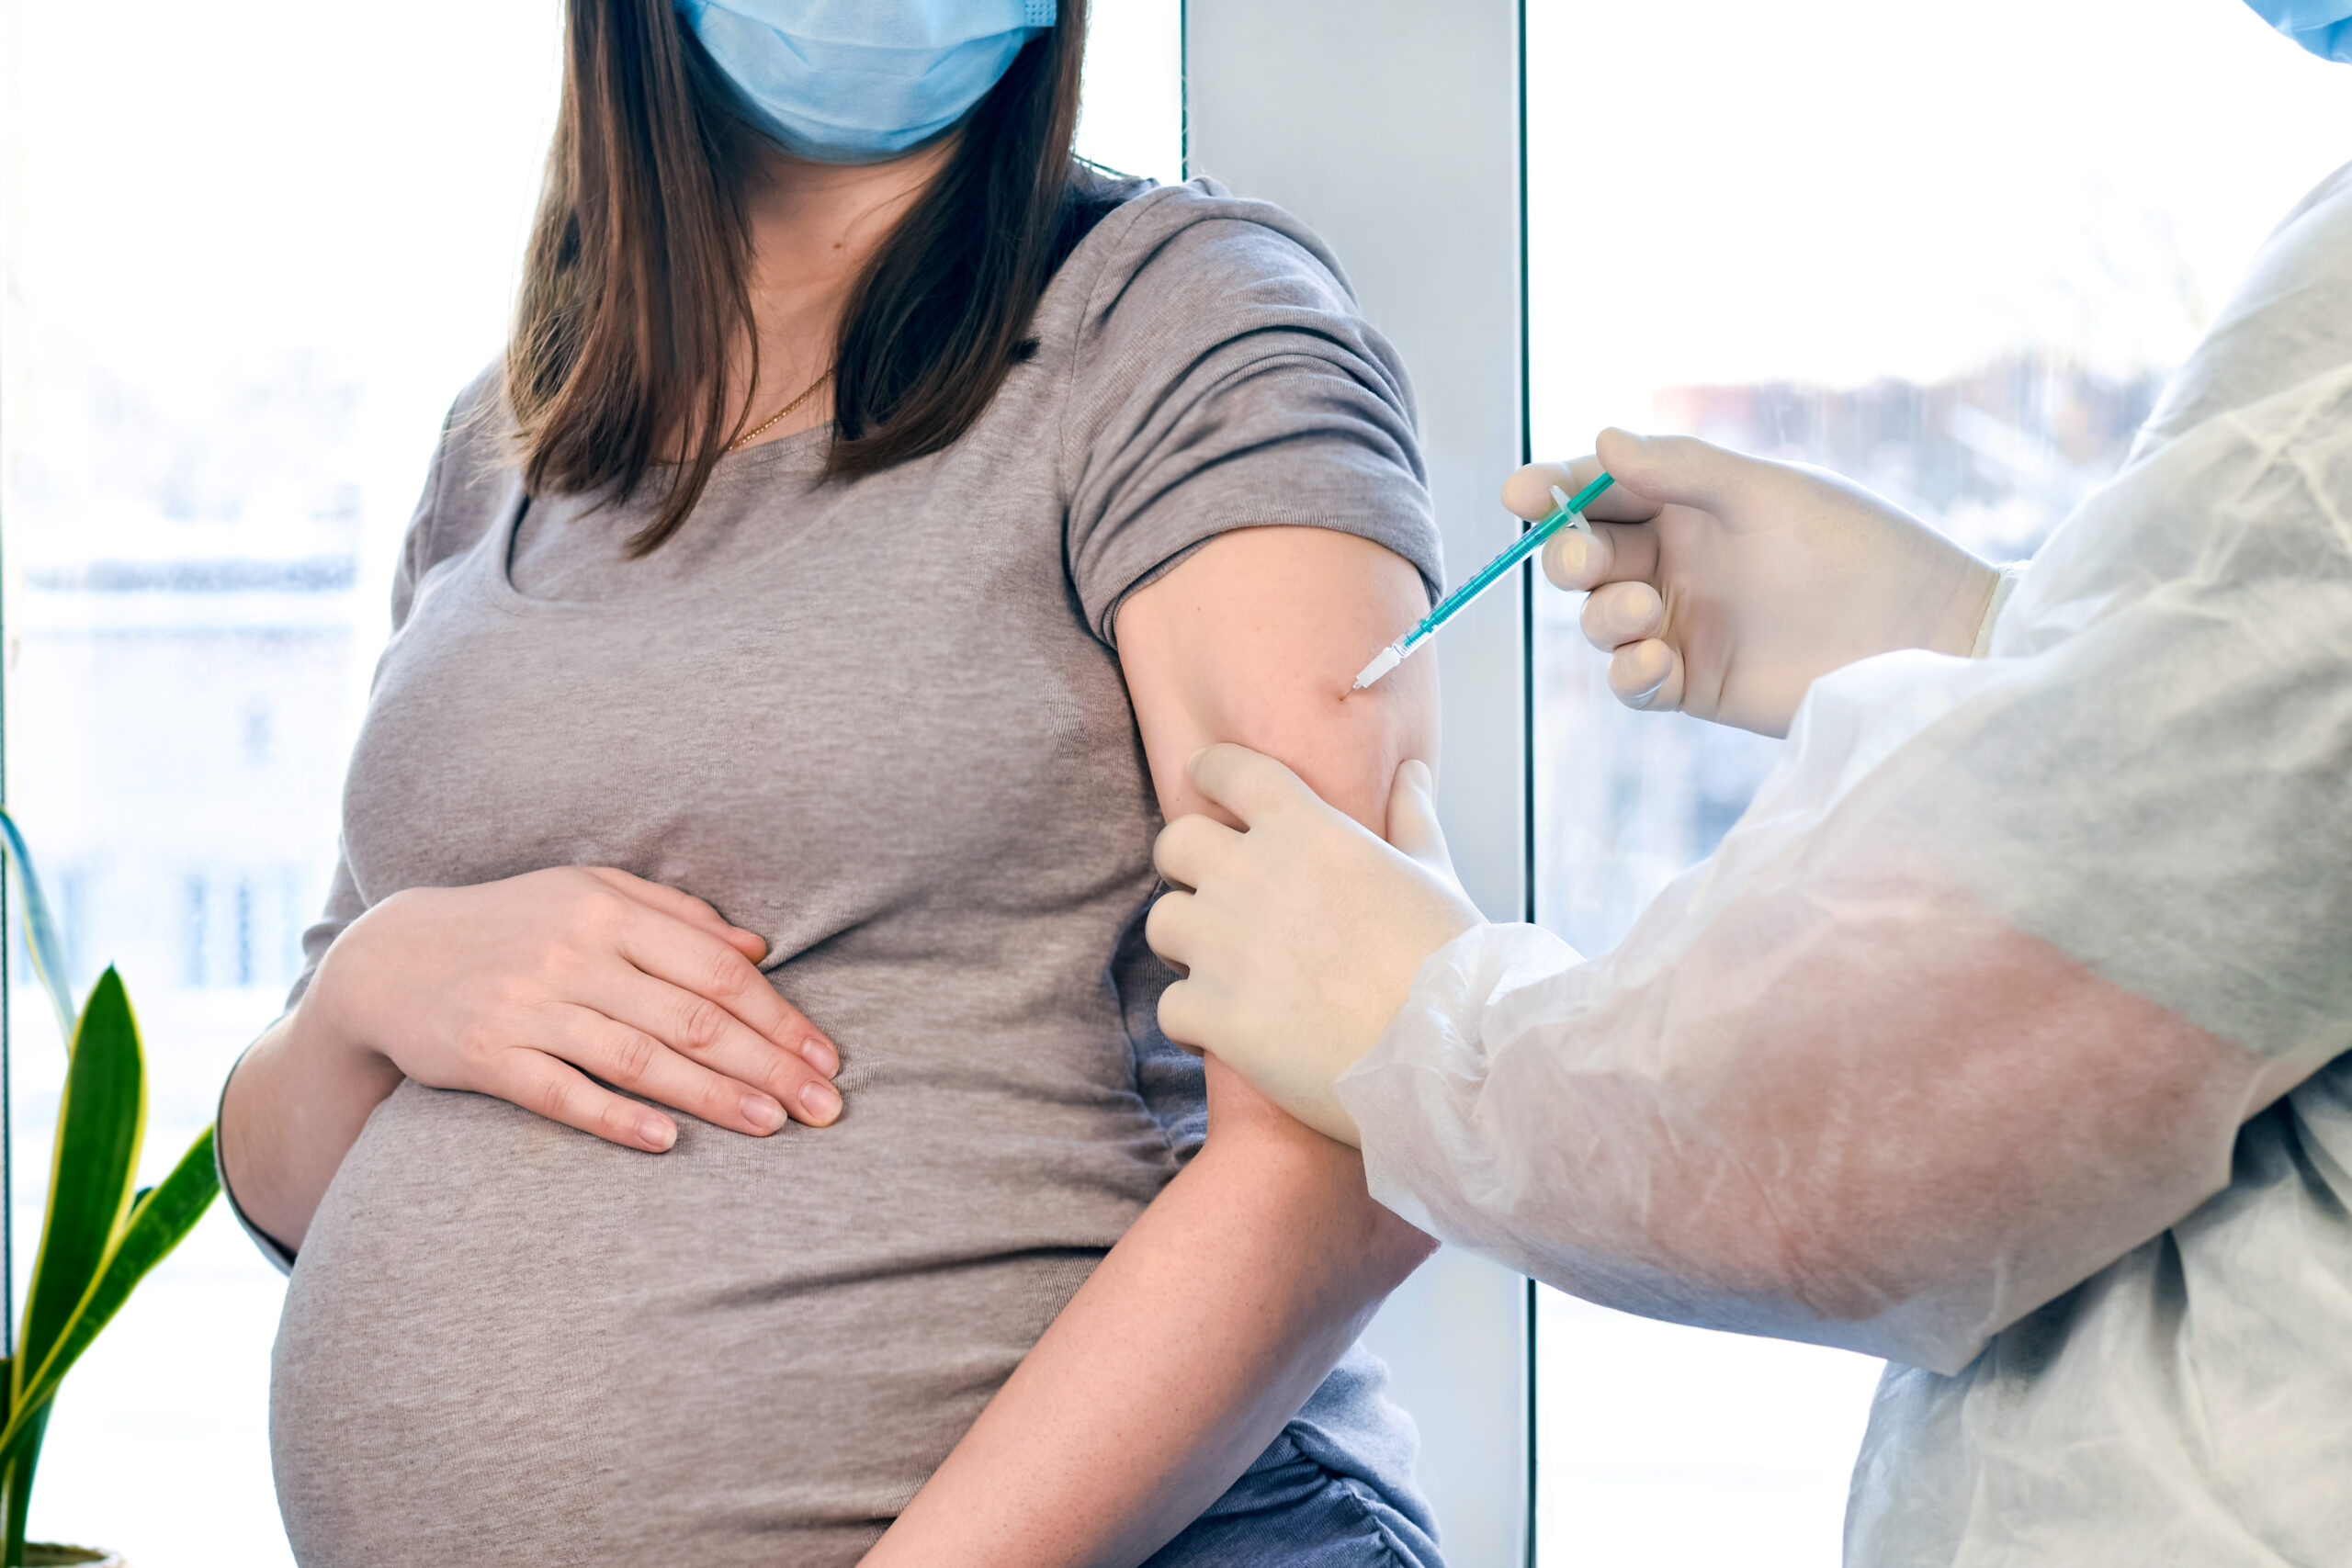 Pregnant Women: Get Vaccinated Now!